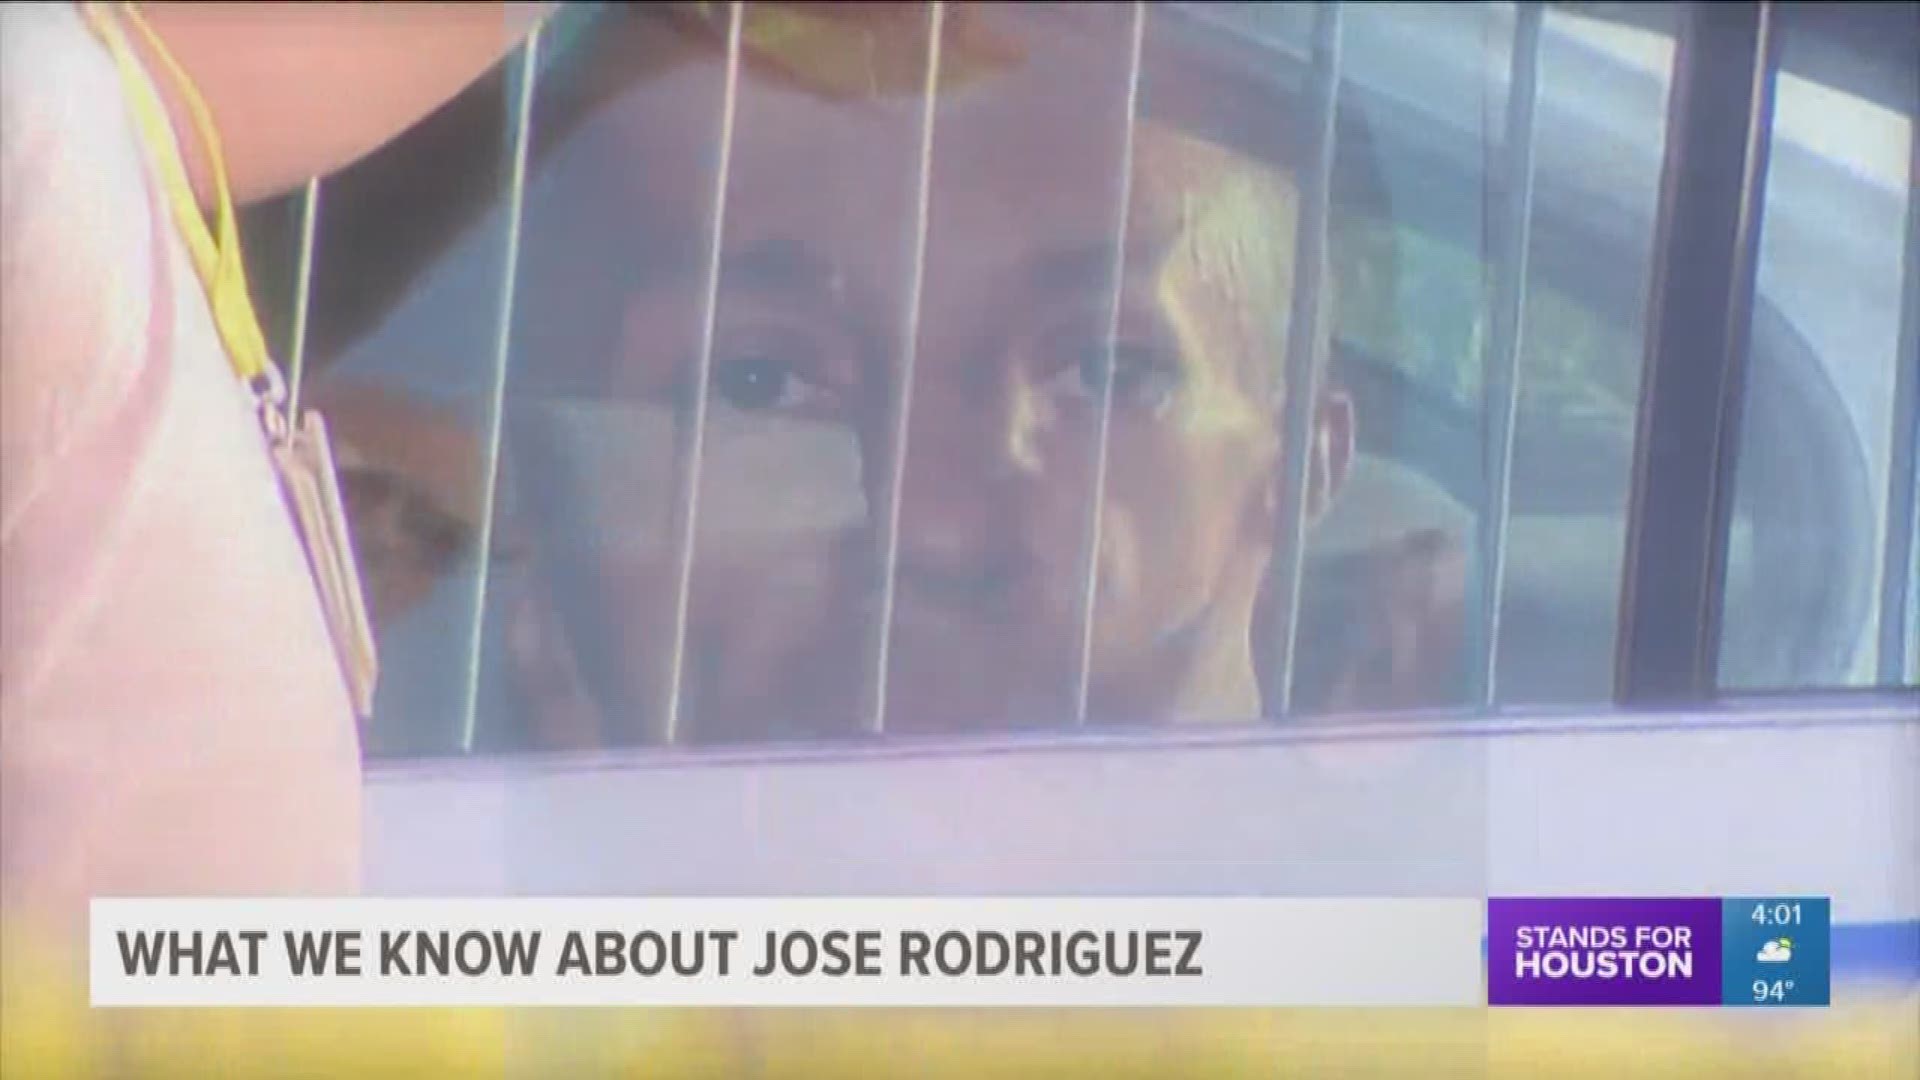 The suspected serial killer accused of committing a string of violent crimes, including three murders, may have centered his crime spree around the neighborhood where he grew up. Several neighbors tell KHOU 11 News Jose Gilberto Rodriguez was raised by ad